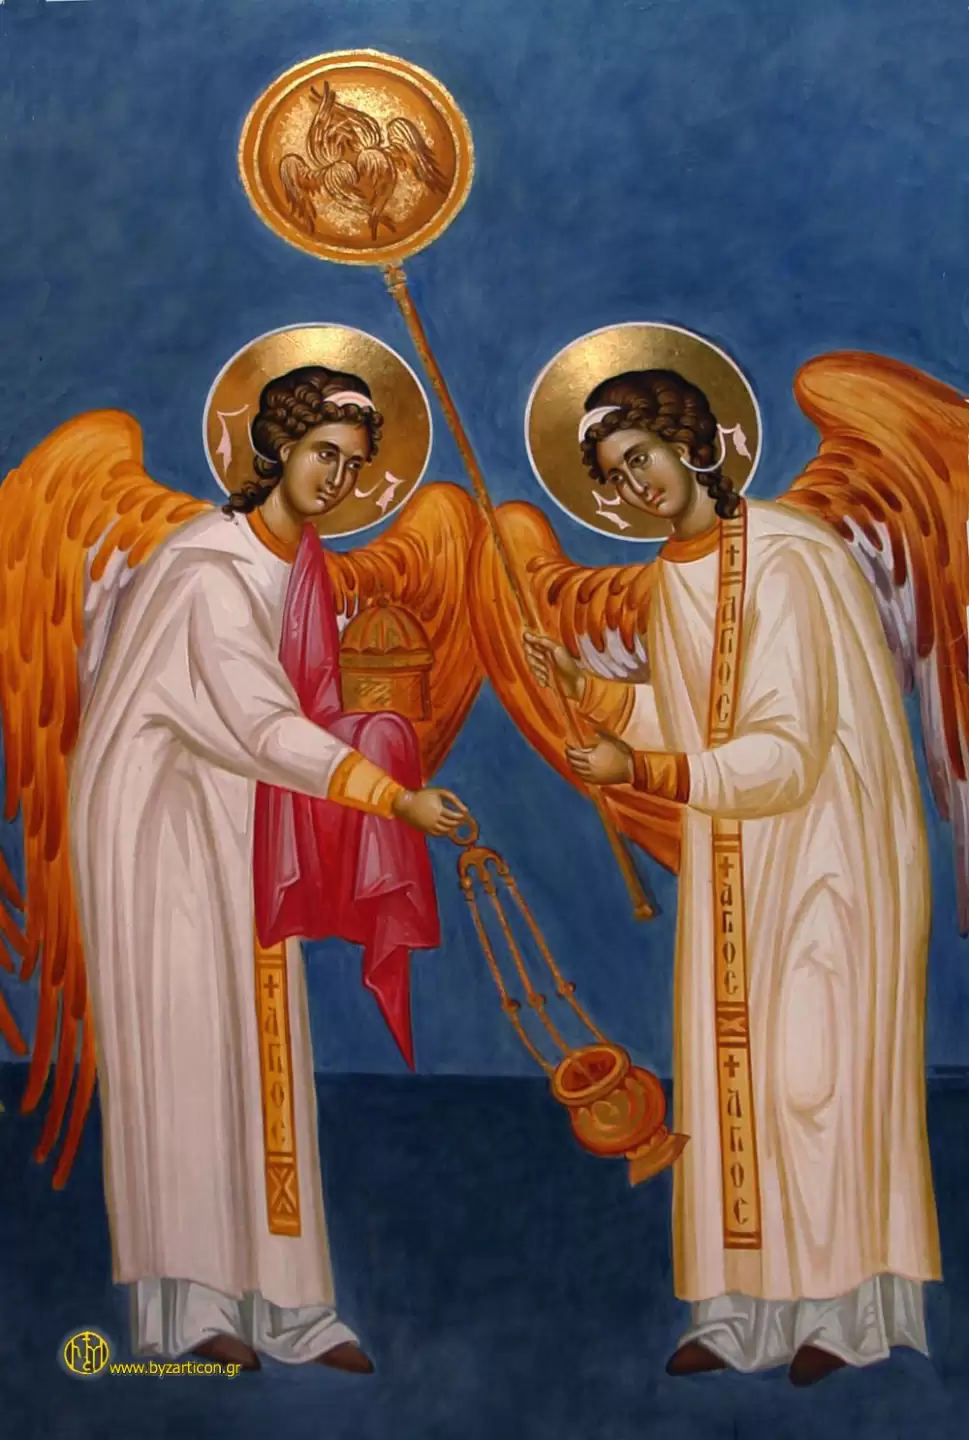 ANGELS SERVING IN THE DIVINE LITURGY, DETAIL 3